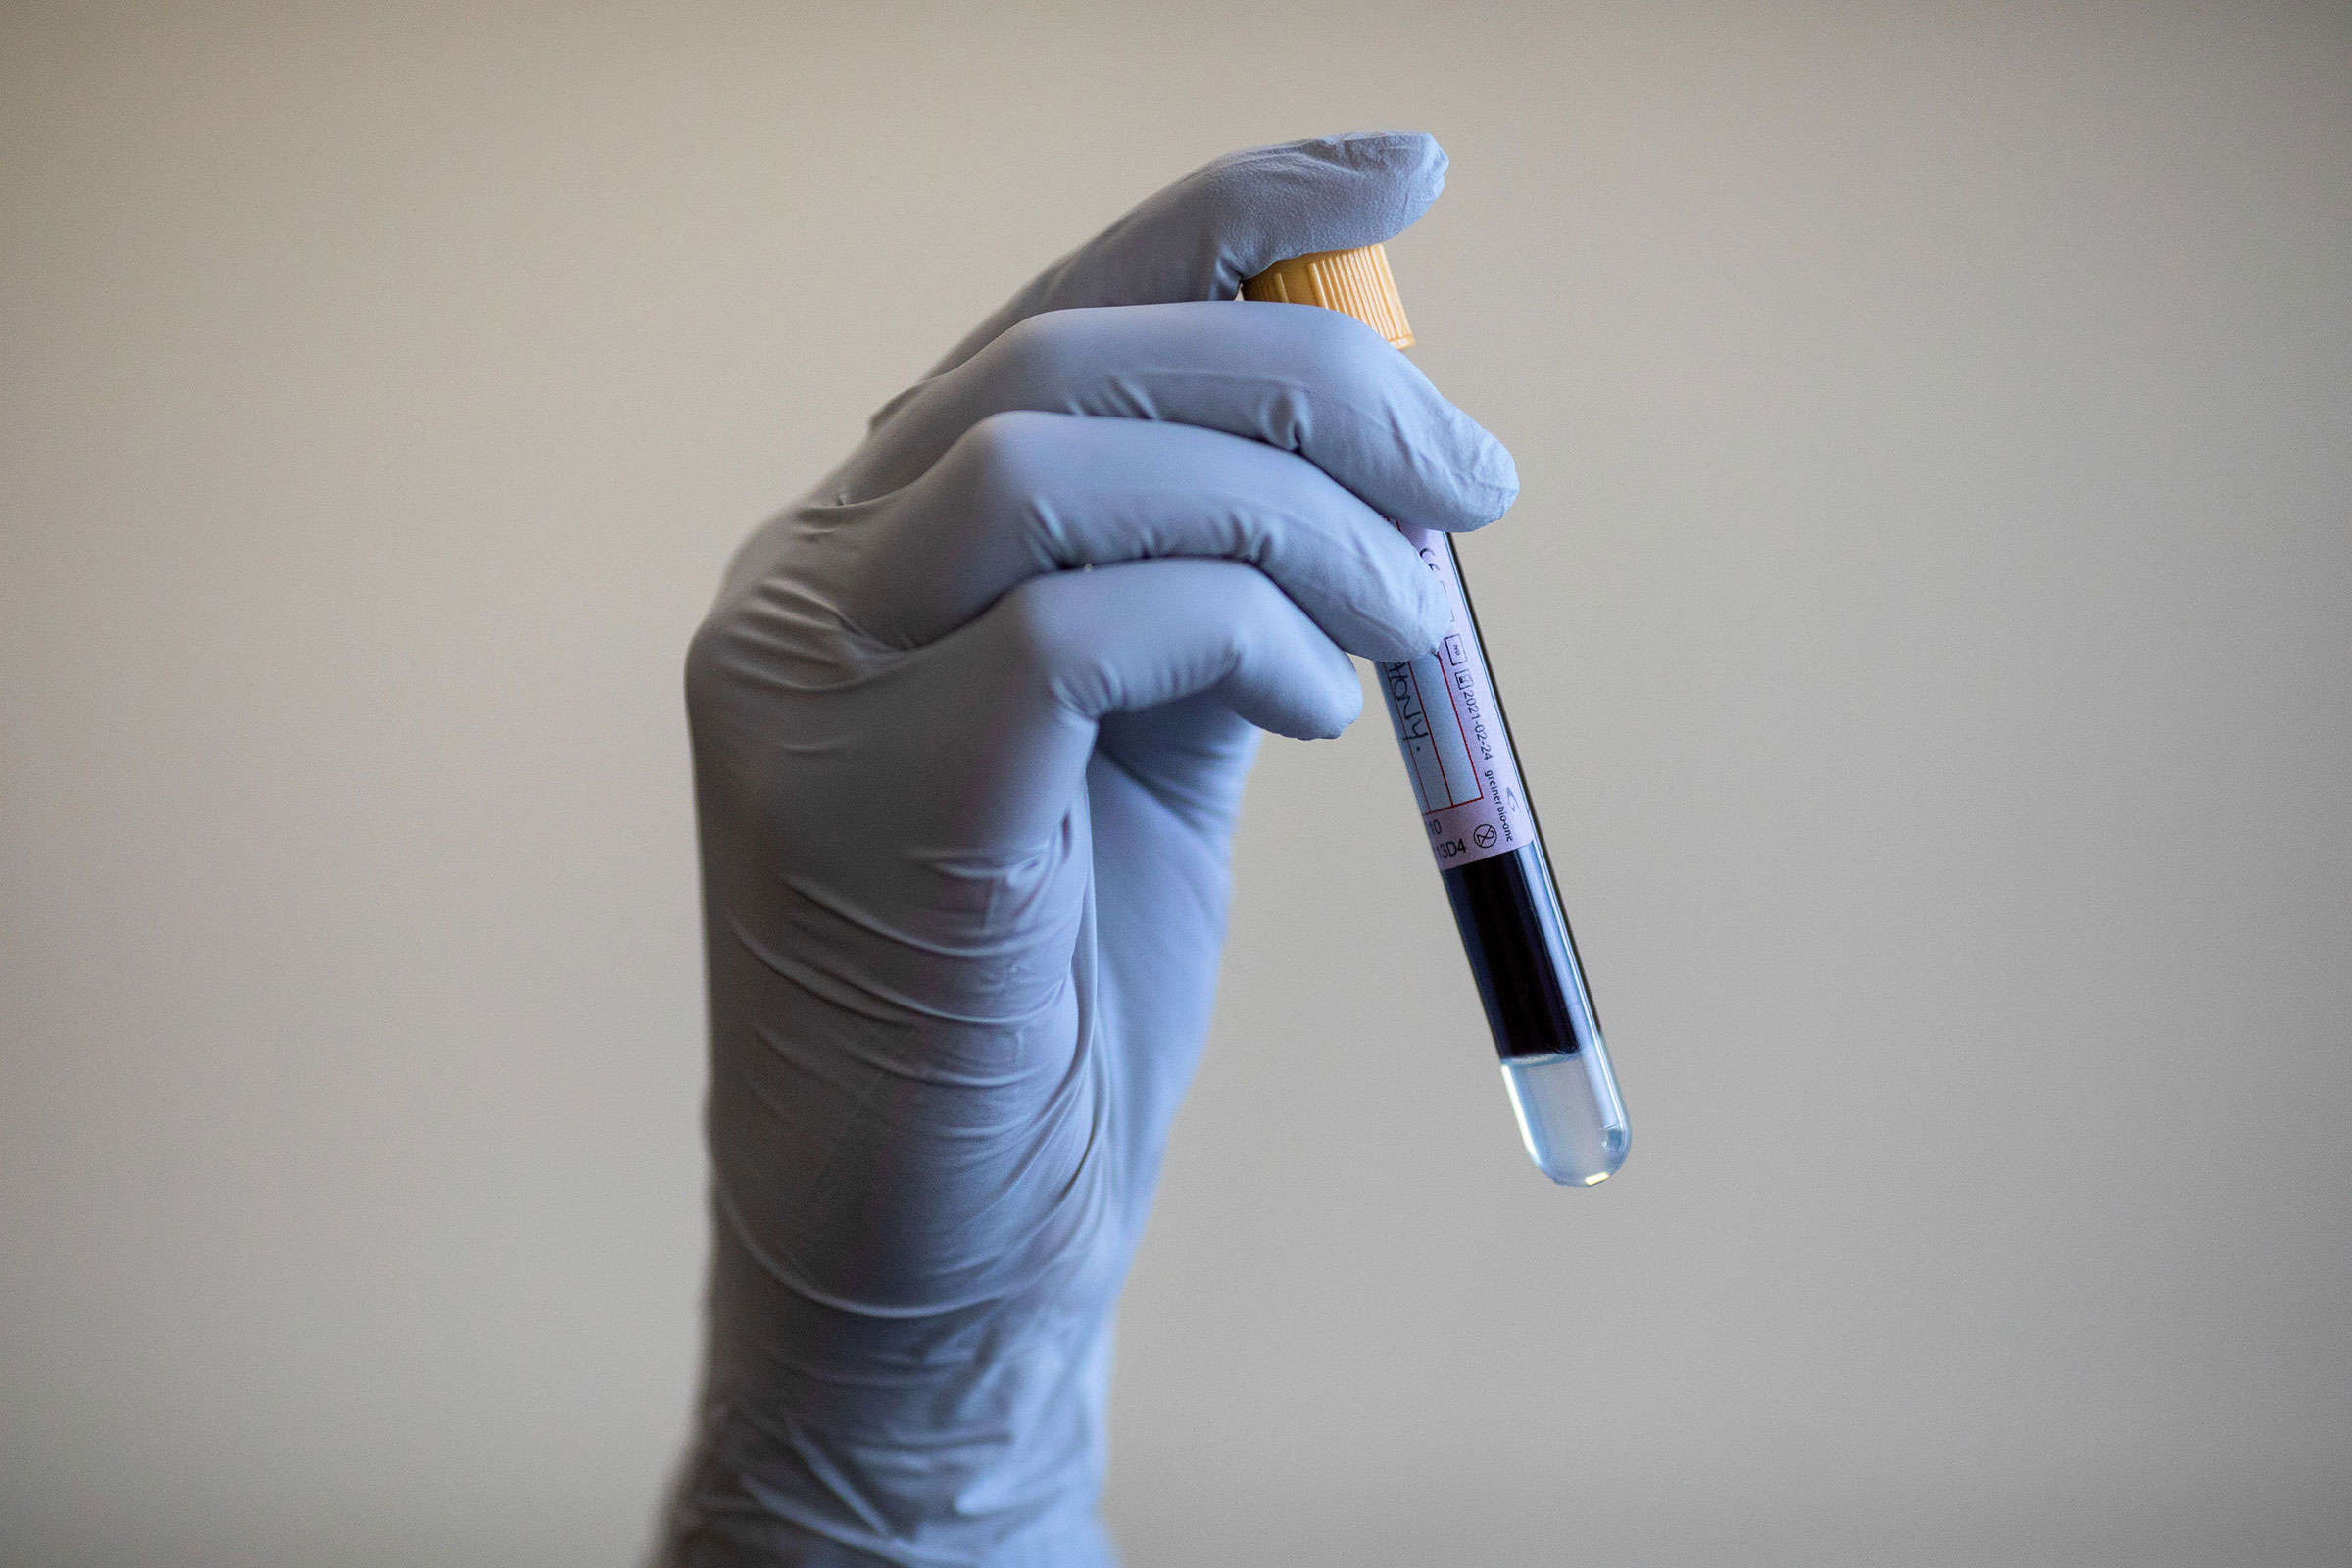 A blood sample is held during an antibody testing program at the Hollymore Ambulance Hub of the West Midlands Ambulance Service in Birmingham, Britain, on June 5, 2020. (Simon Dawson—EPA-EFE/Shutterstock)